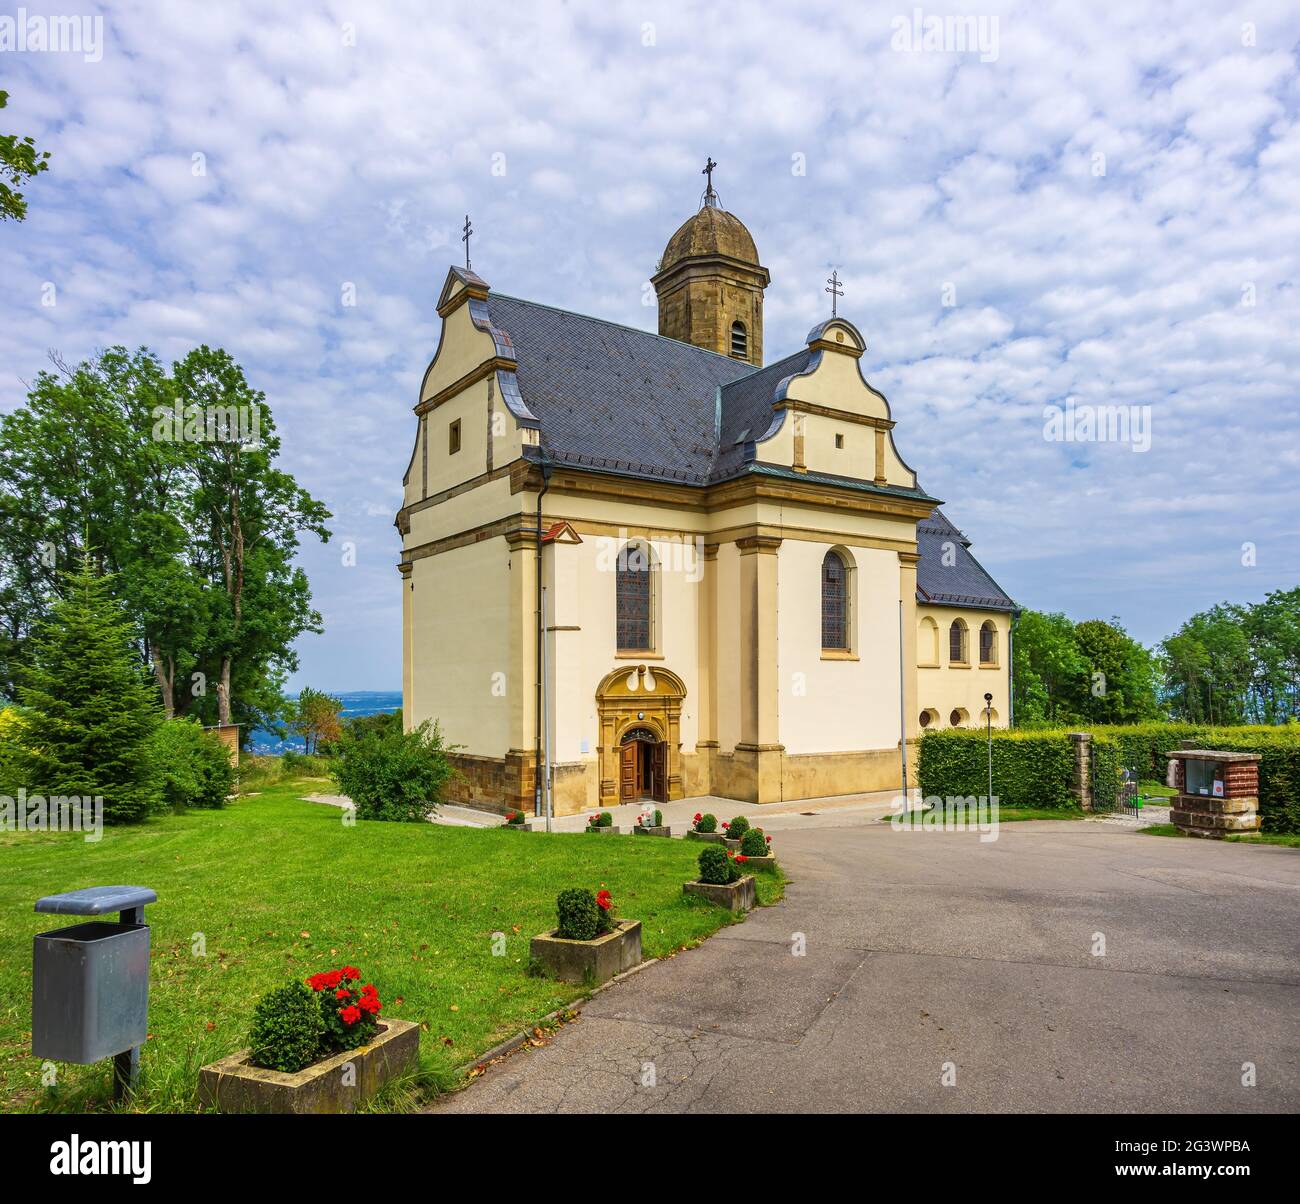 Exterior view of the Baroque pilgrimage and parish church of St. Mary on Rechberg, Schwäbisch Gmünd, Baden-Württemberg, Germany. Stock Photo